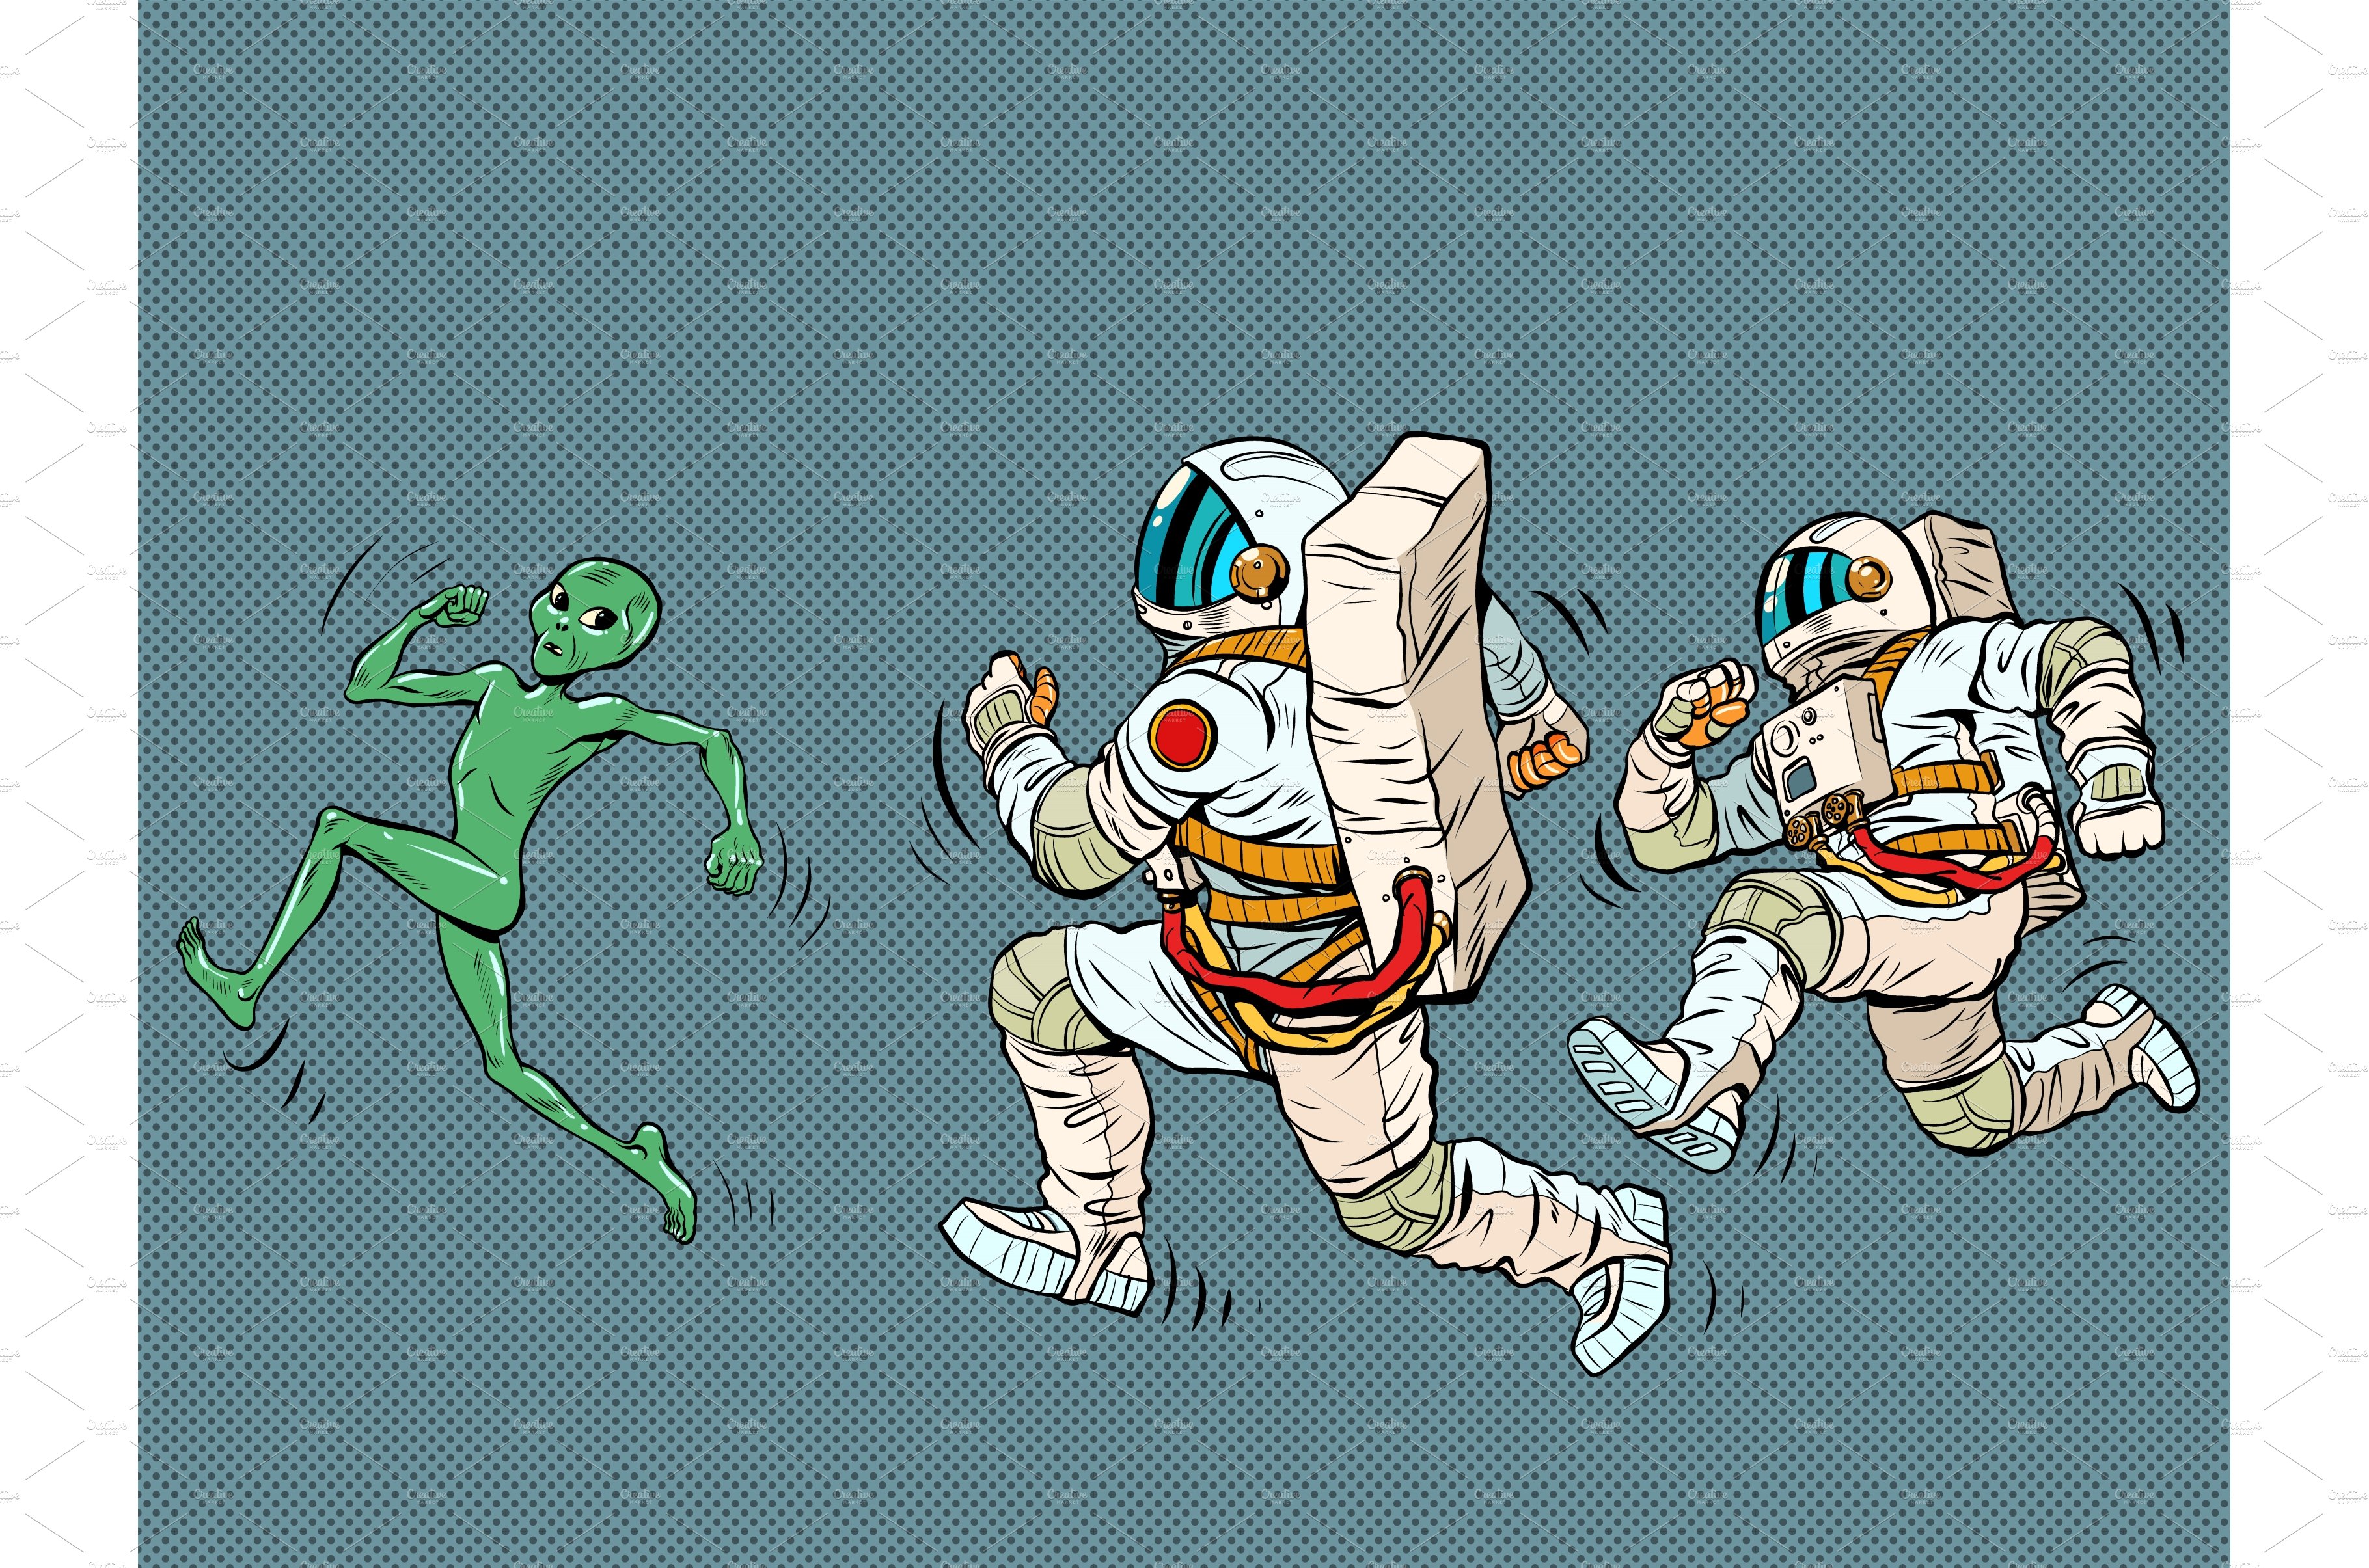 Astronauts are running after the cover image.